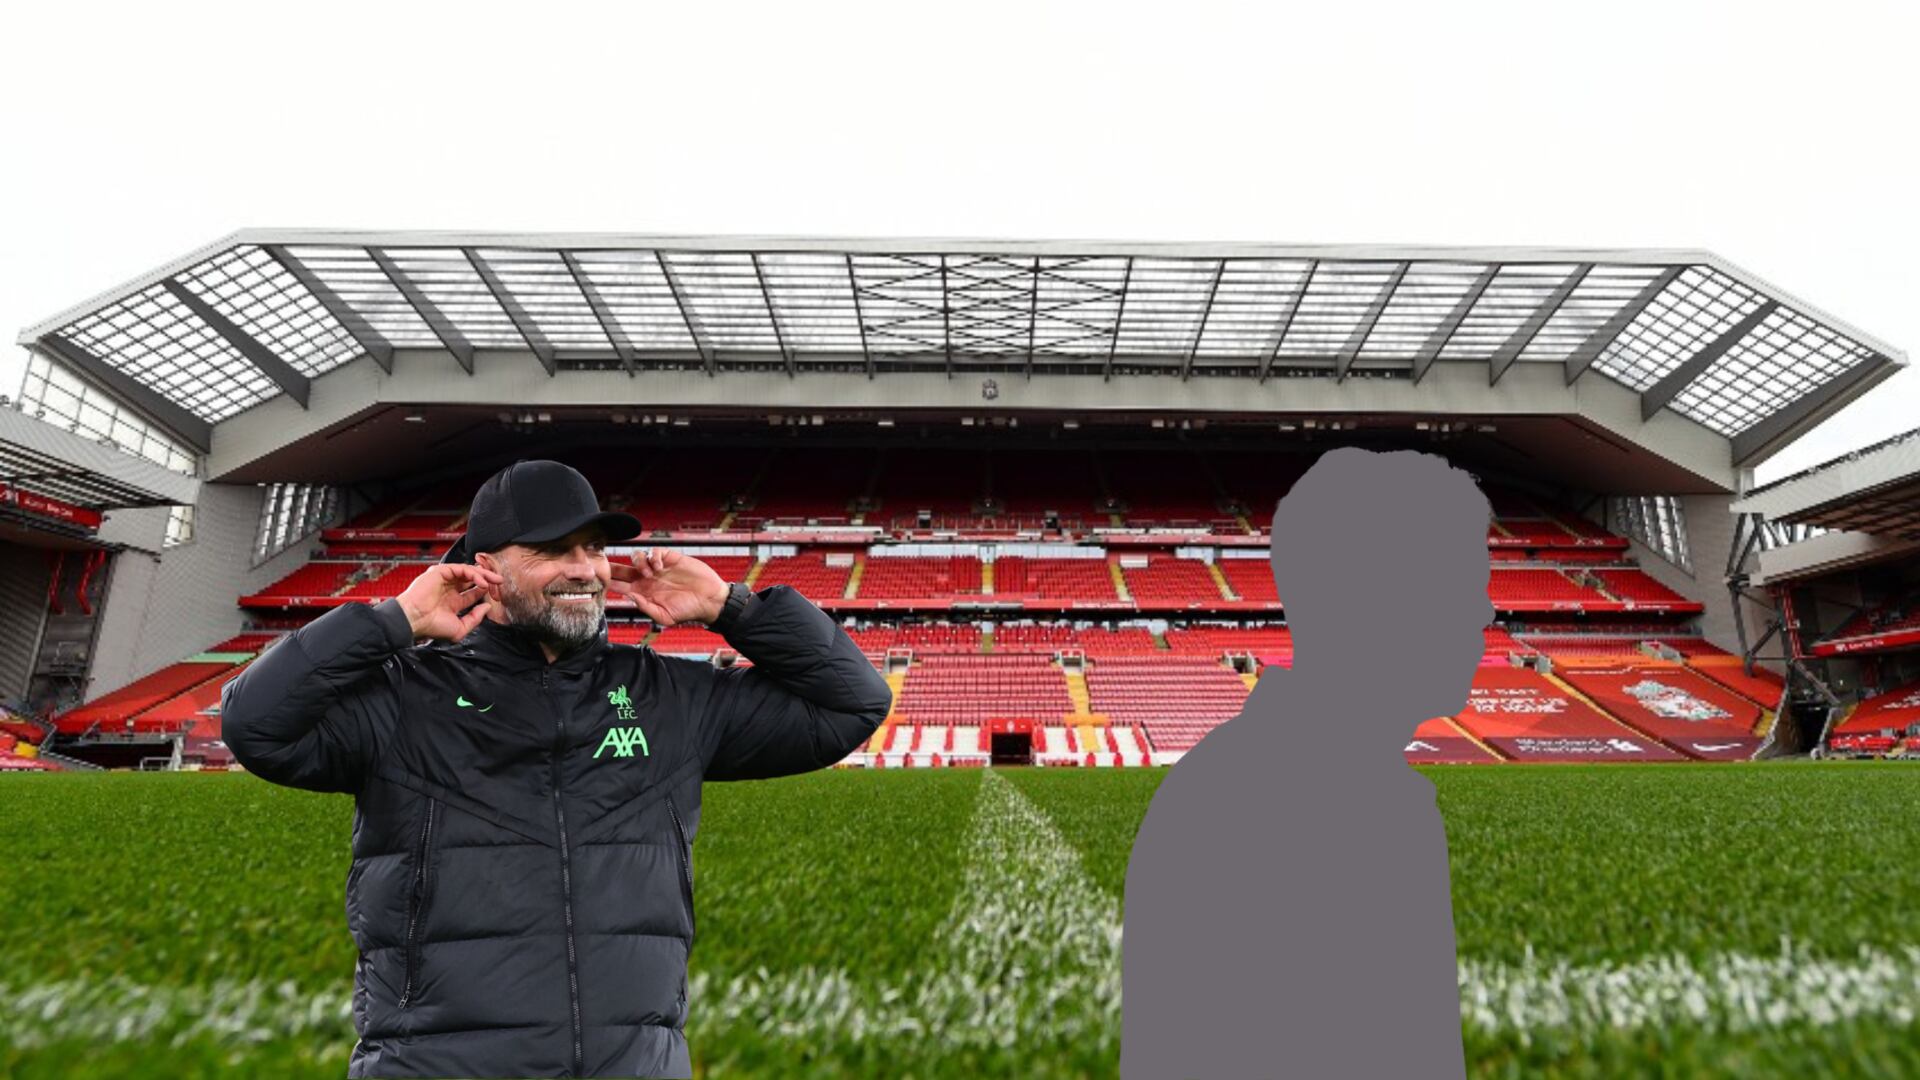 Klopp's replacement found? Liverpool to appoint their next manager for 3 years 